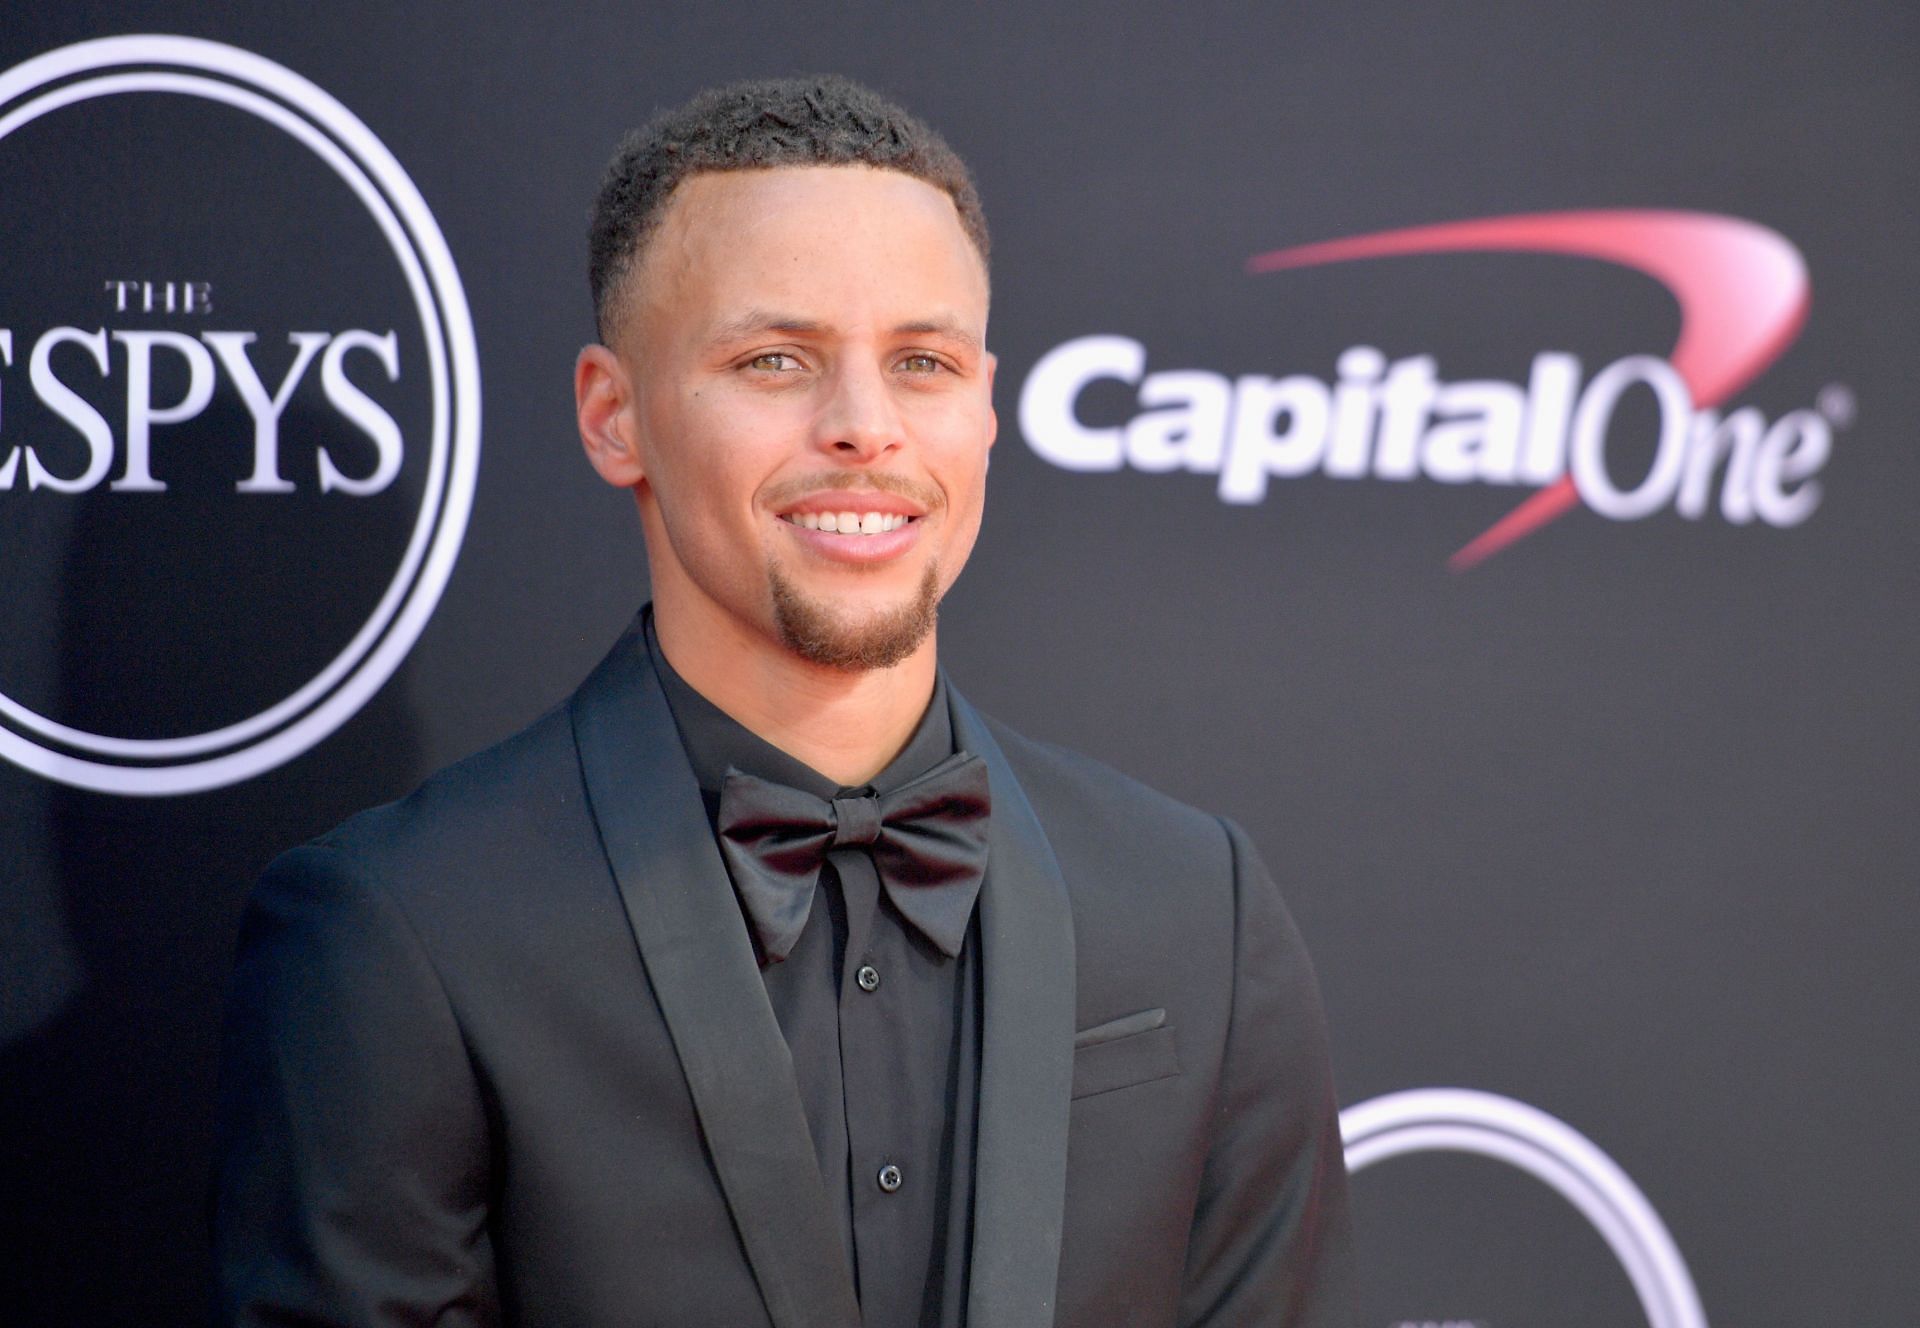 Beware of Stephen Curry, the Warriors' baby-faced assassin – The